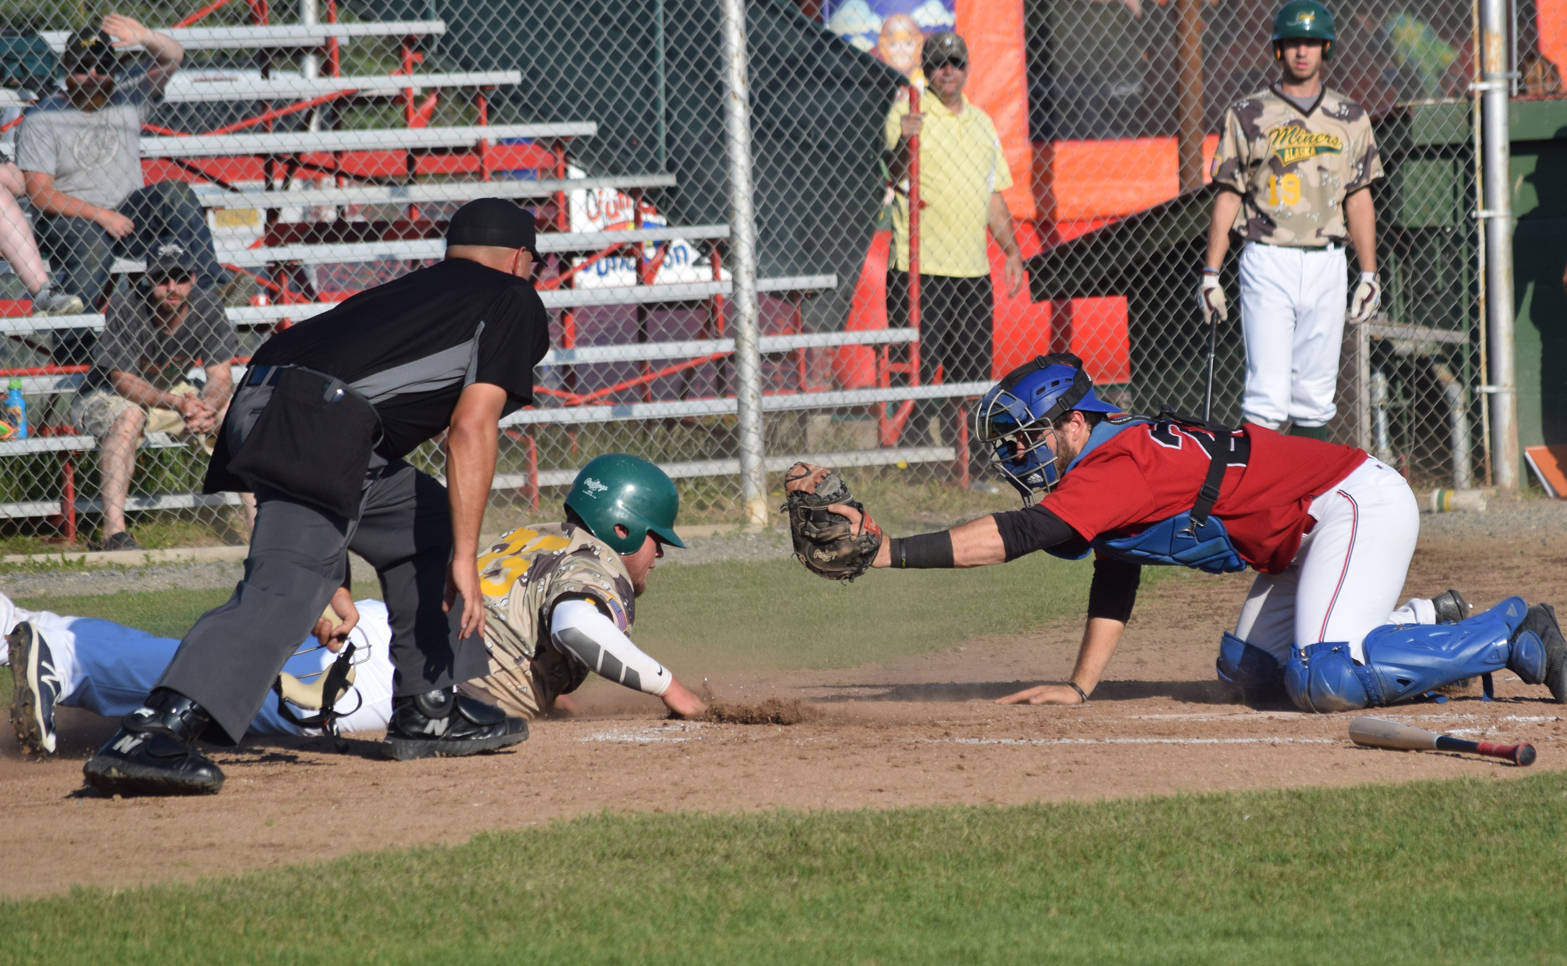 Oilers catcher Ryan Koch tags out Spencer Henson of the Miners in the third inning Friday, July 6, 2018, at Coral Seymour Memorial Park in Kenai. (Photo by Jeff Helminiak/Peninsula Clarion)